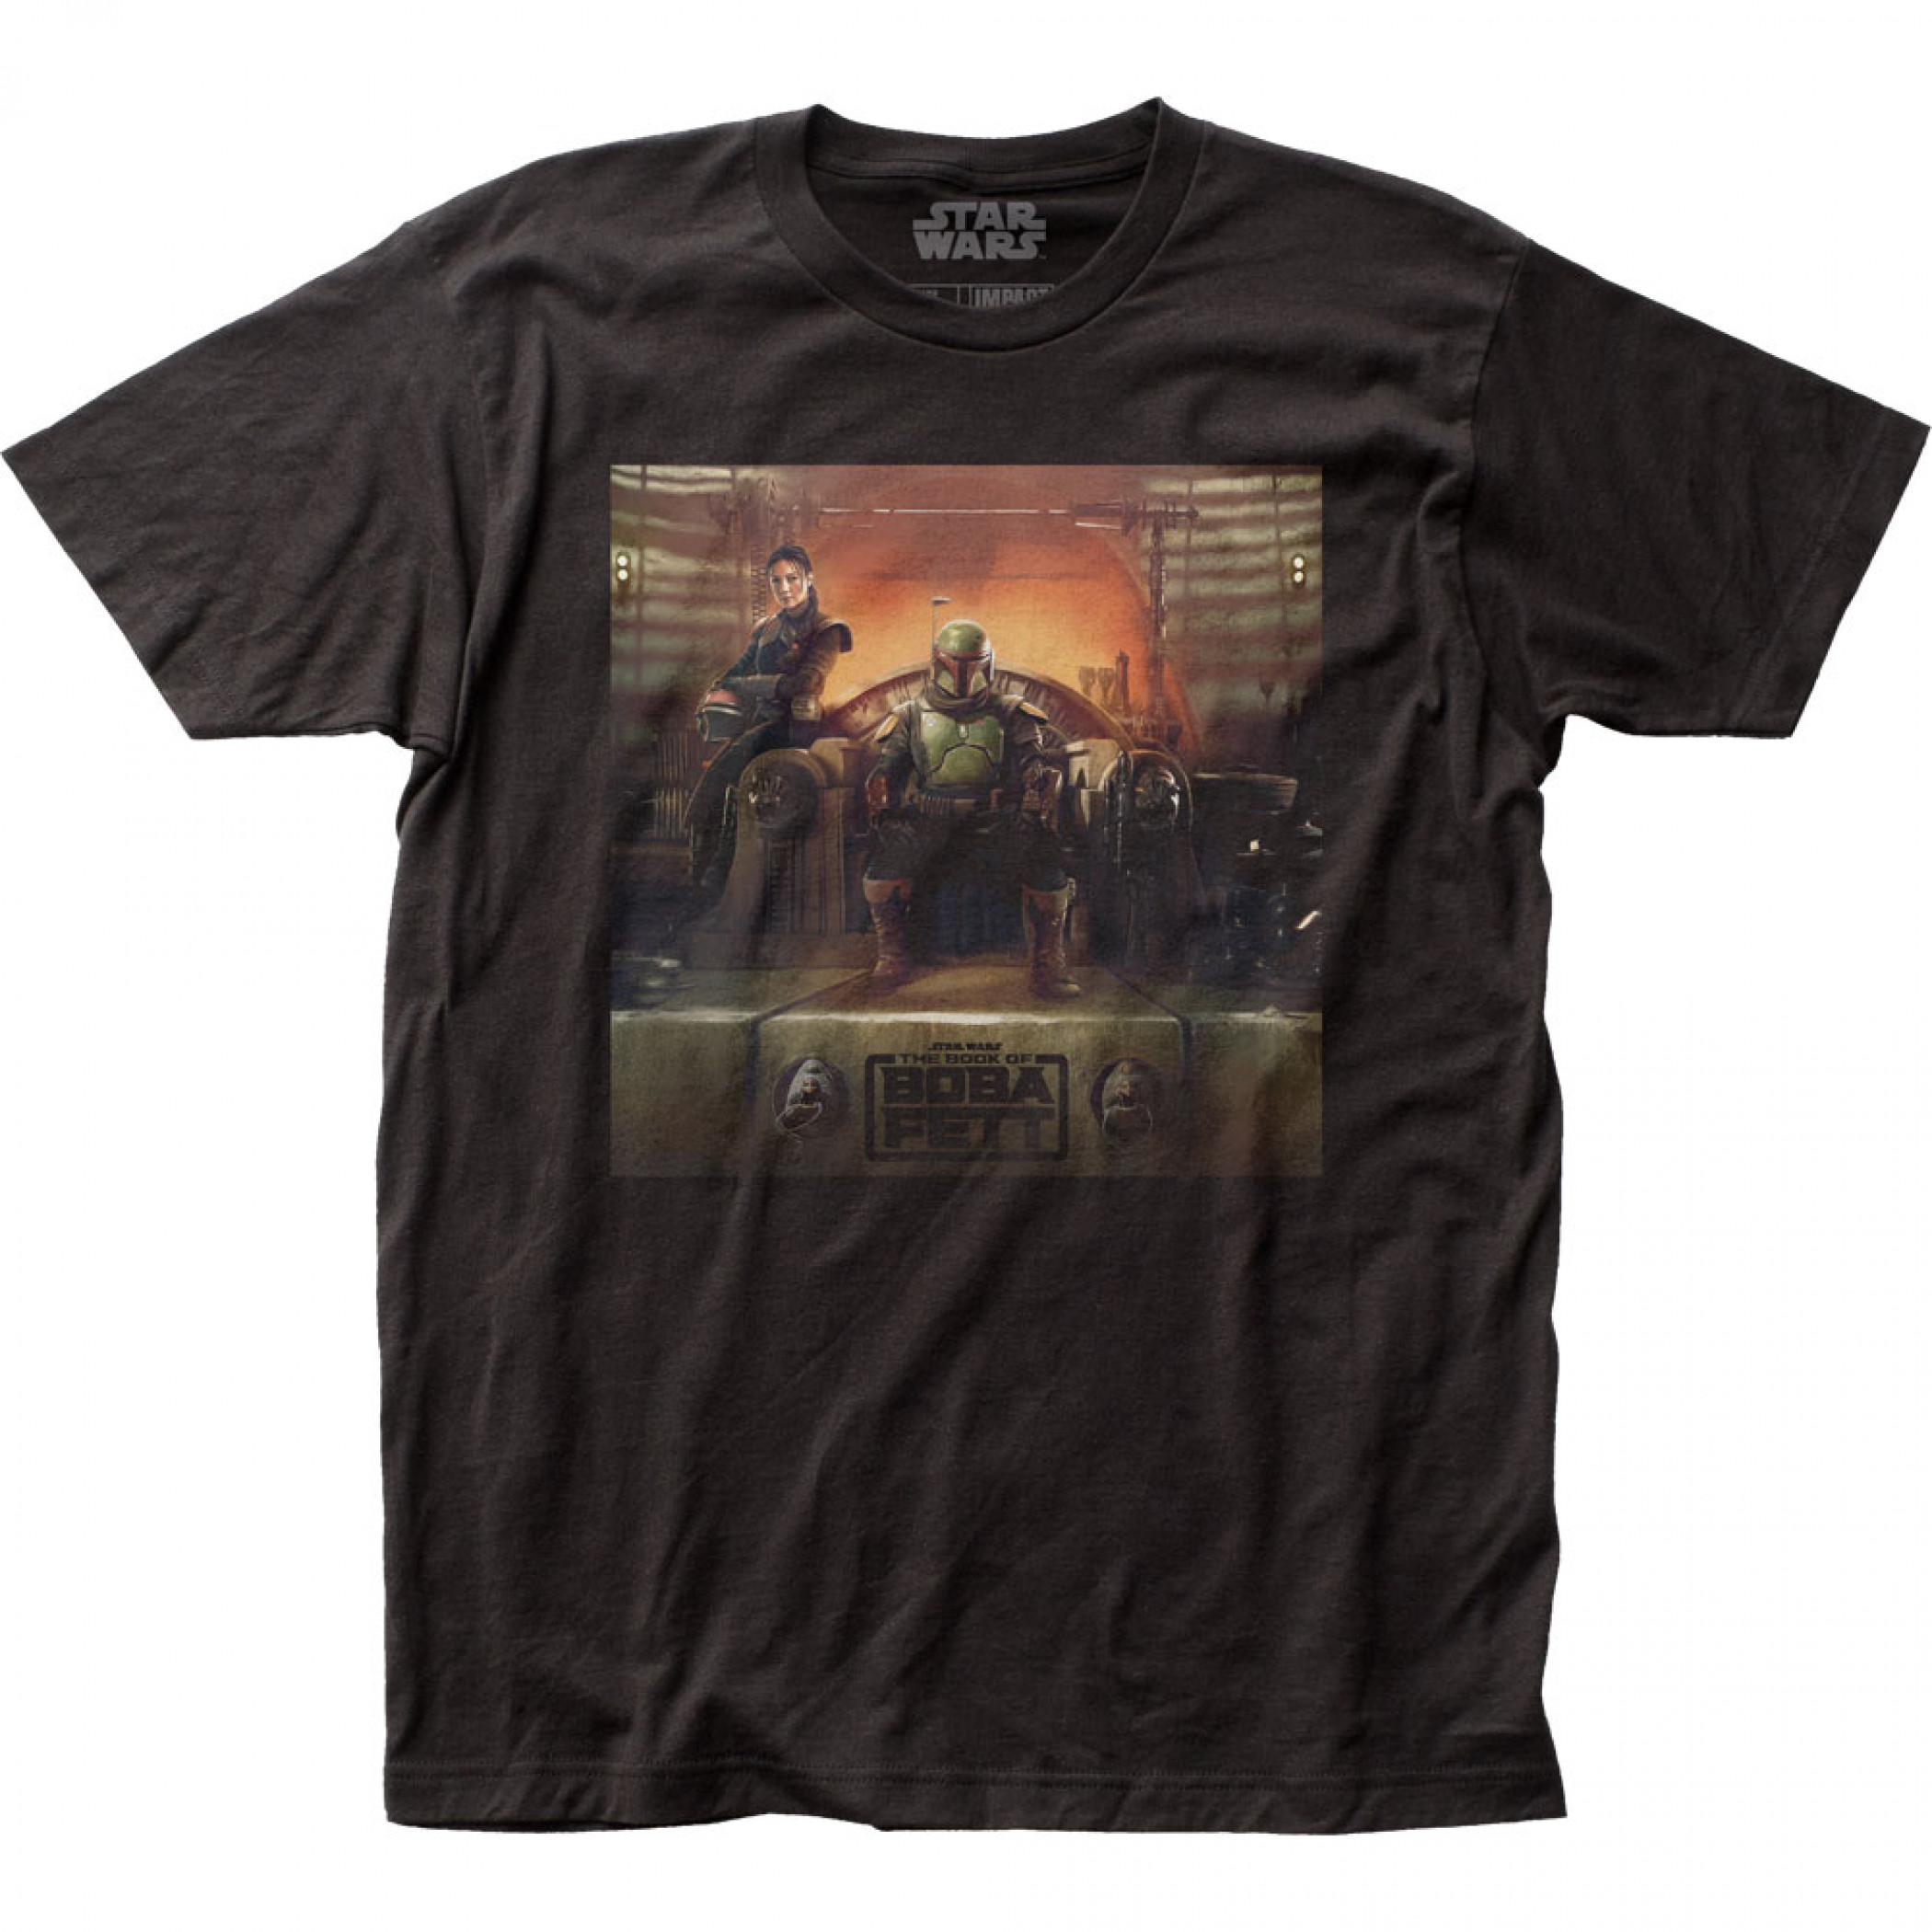 Star Wars The Book Of Boba Fett On the Throne T-Shirt